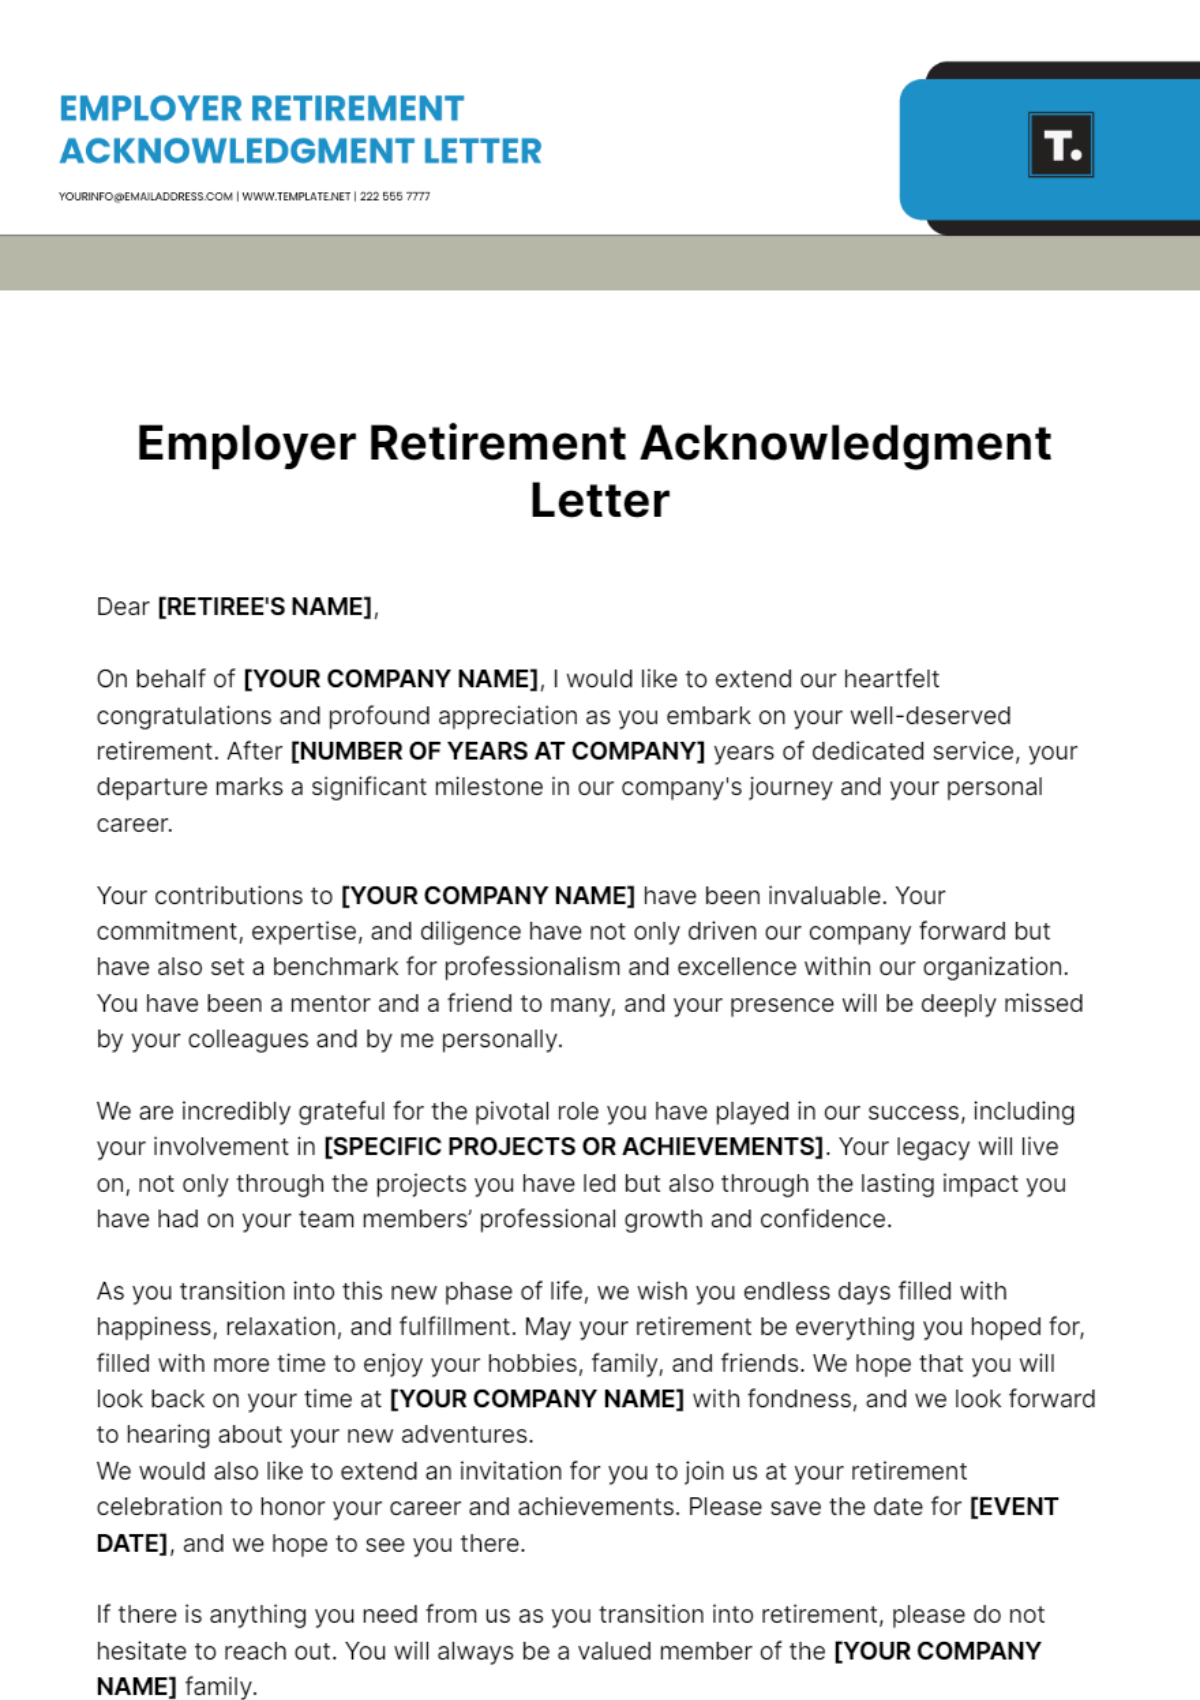 Employer Retirement Acknowledgment Letter Template